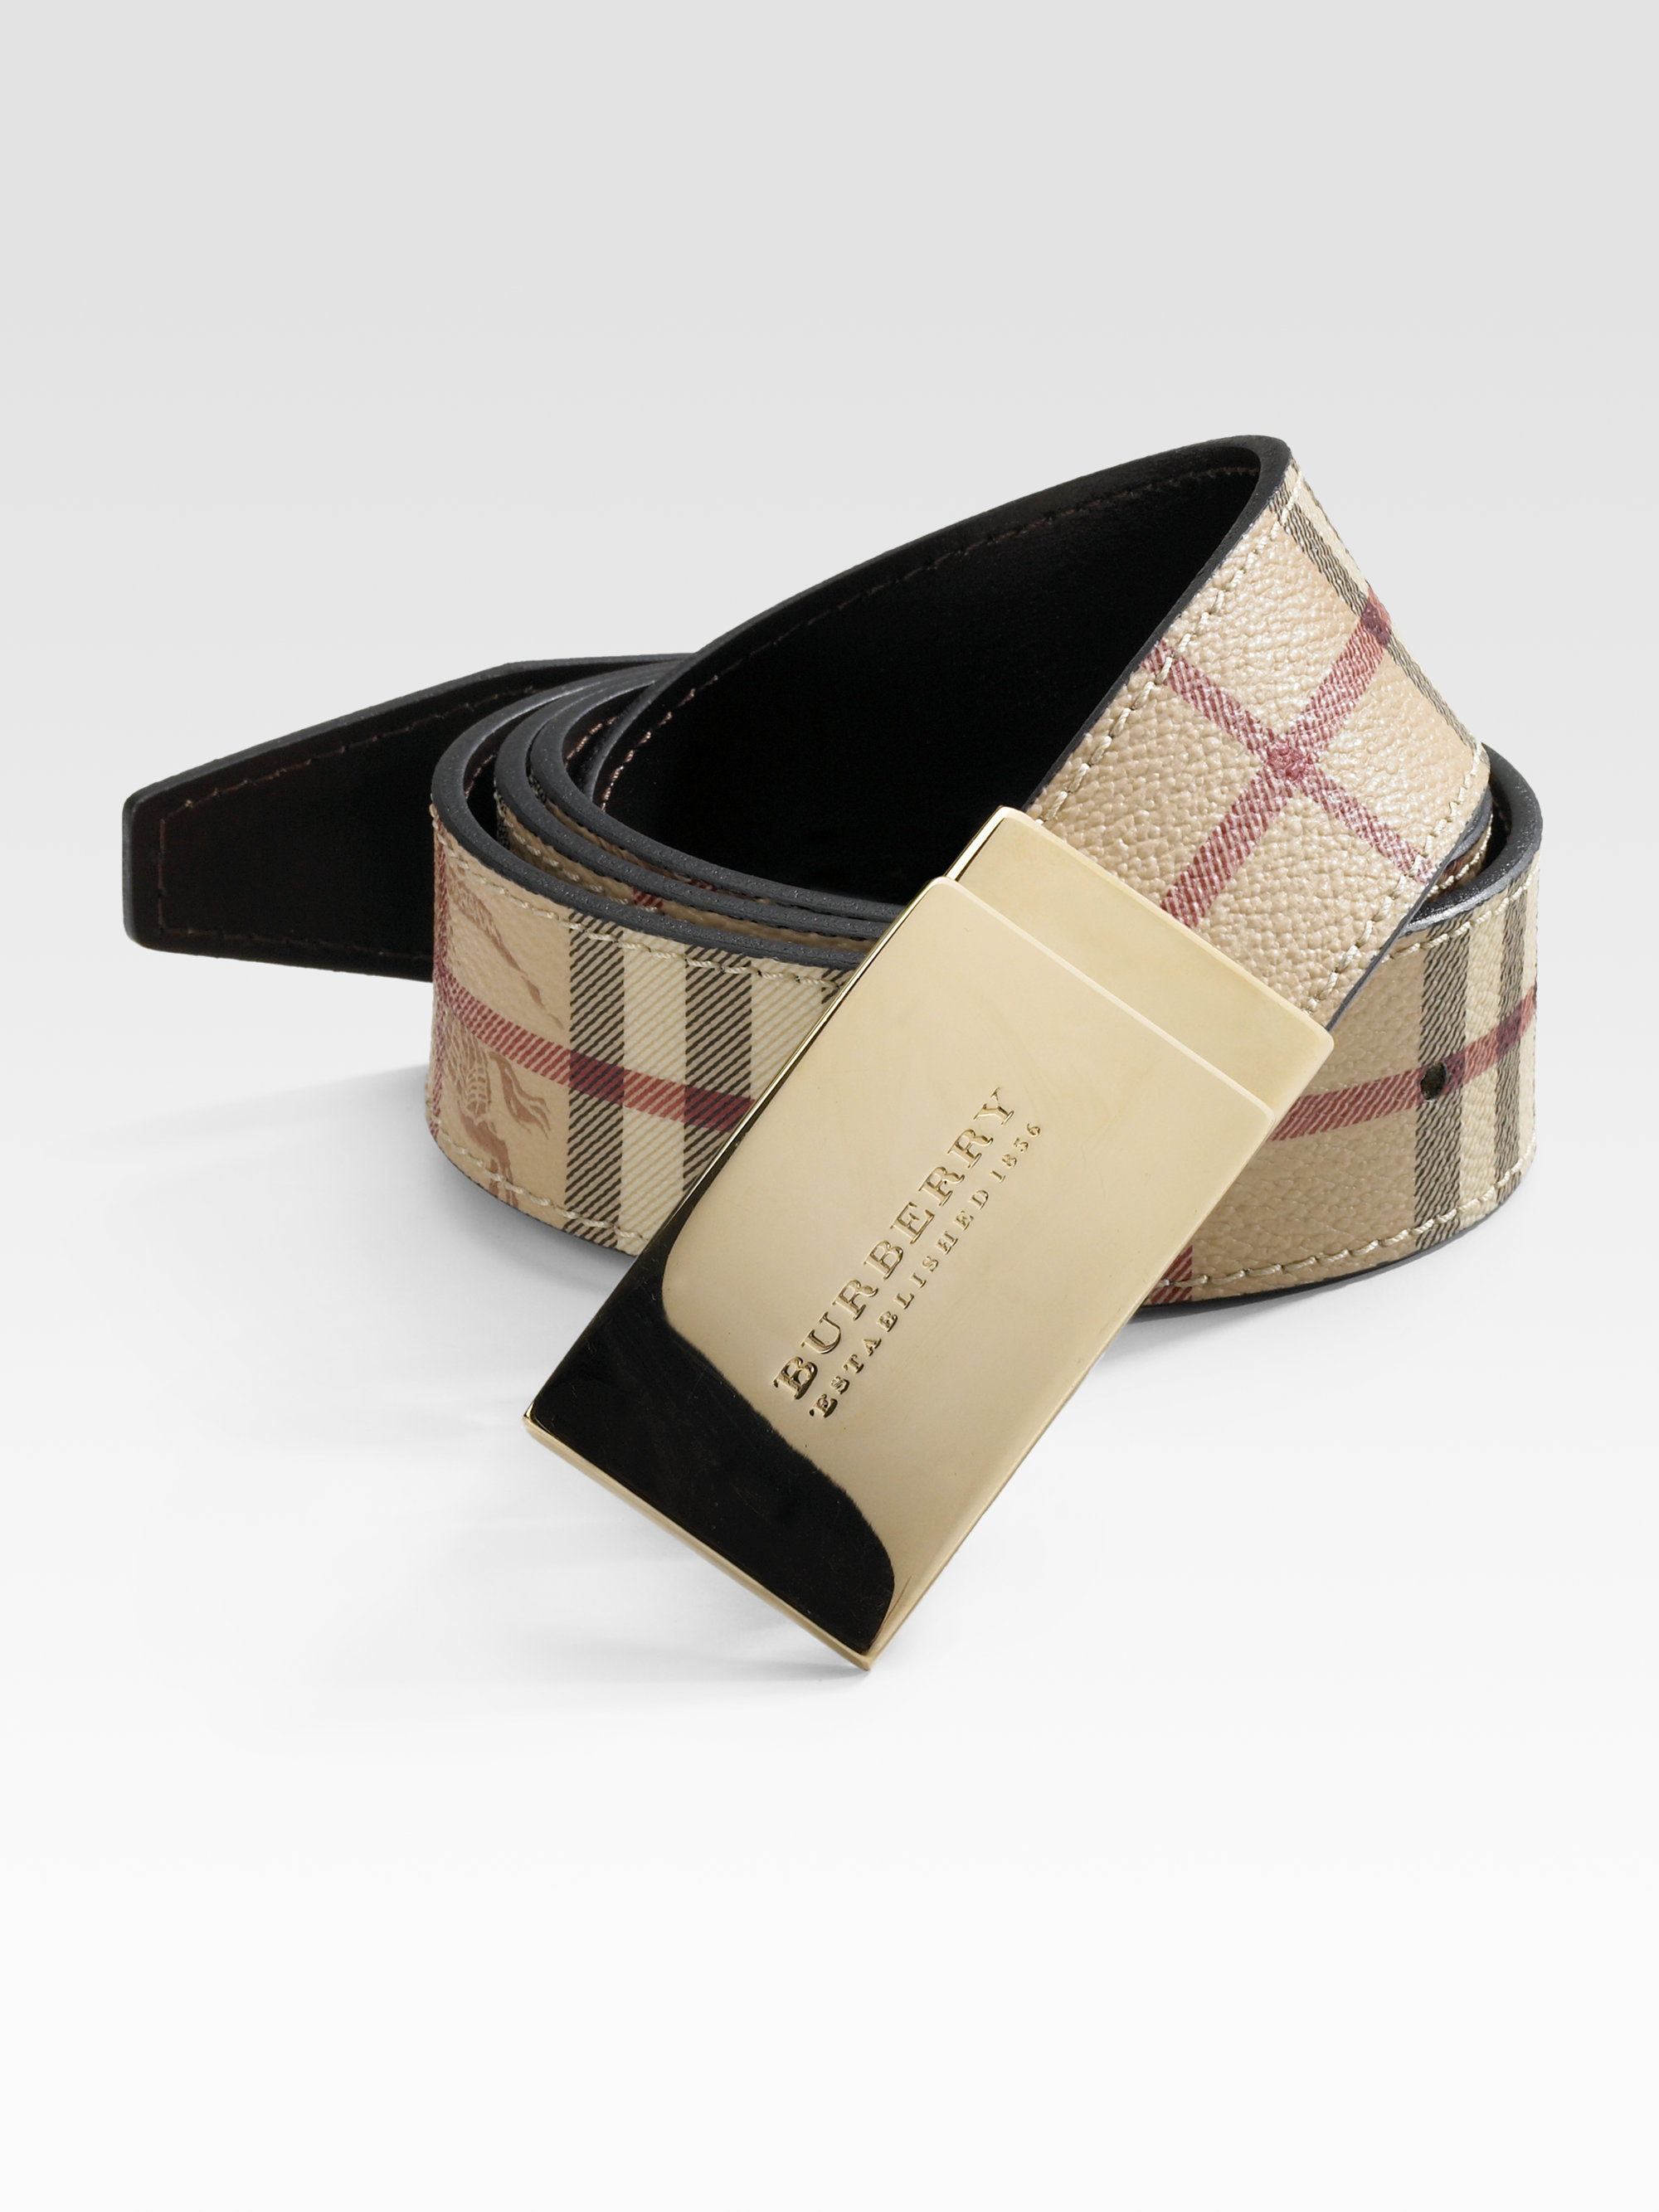 Lyst - Burberry Signature Belt in Brown for Men